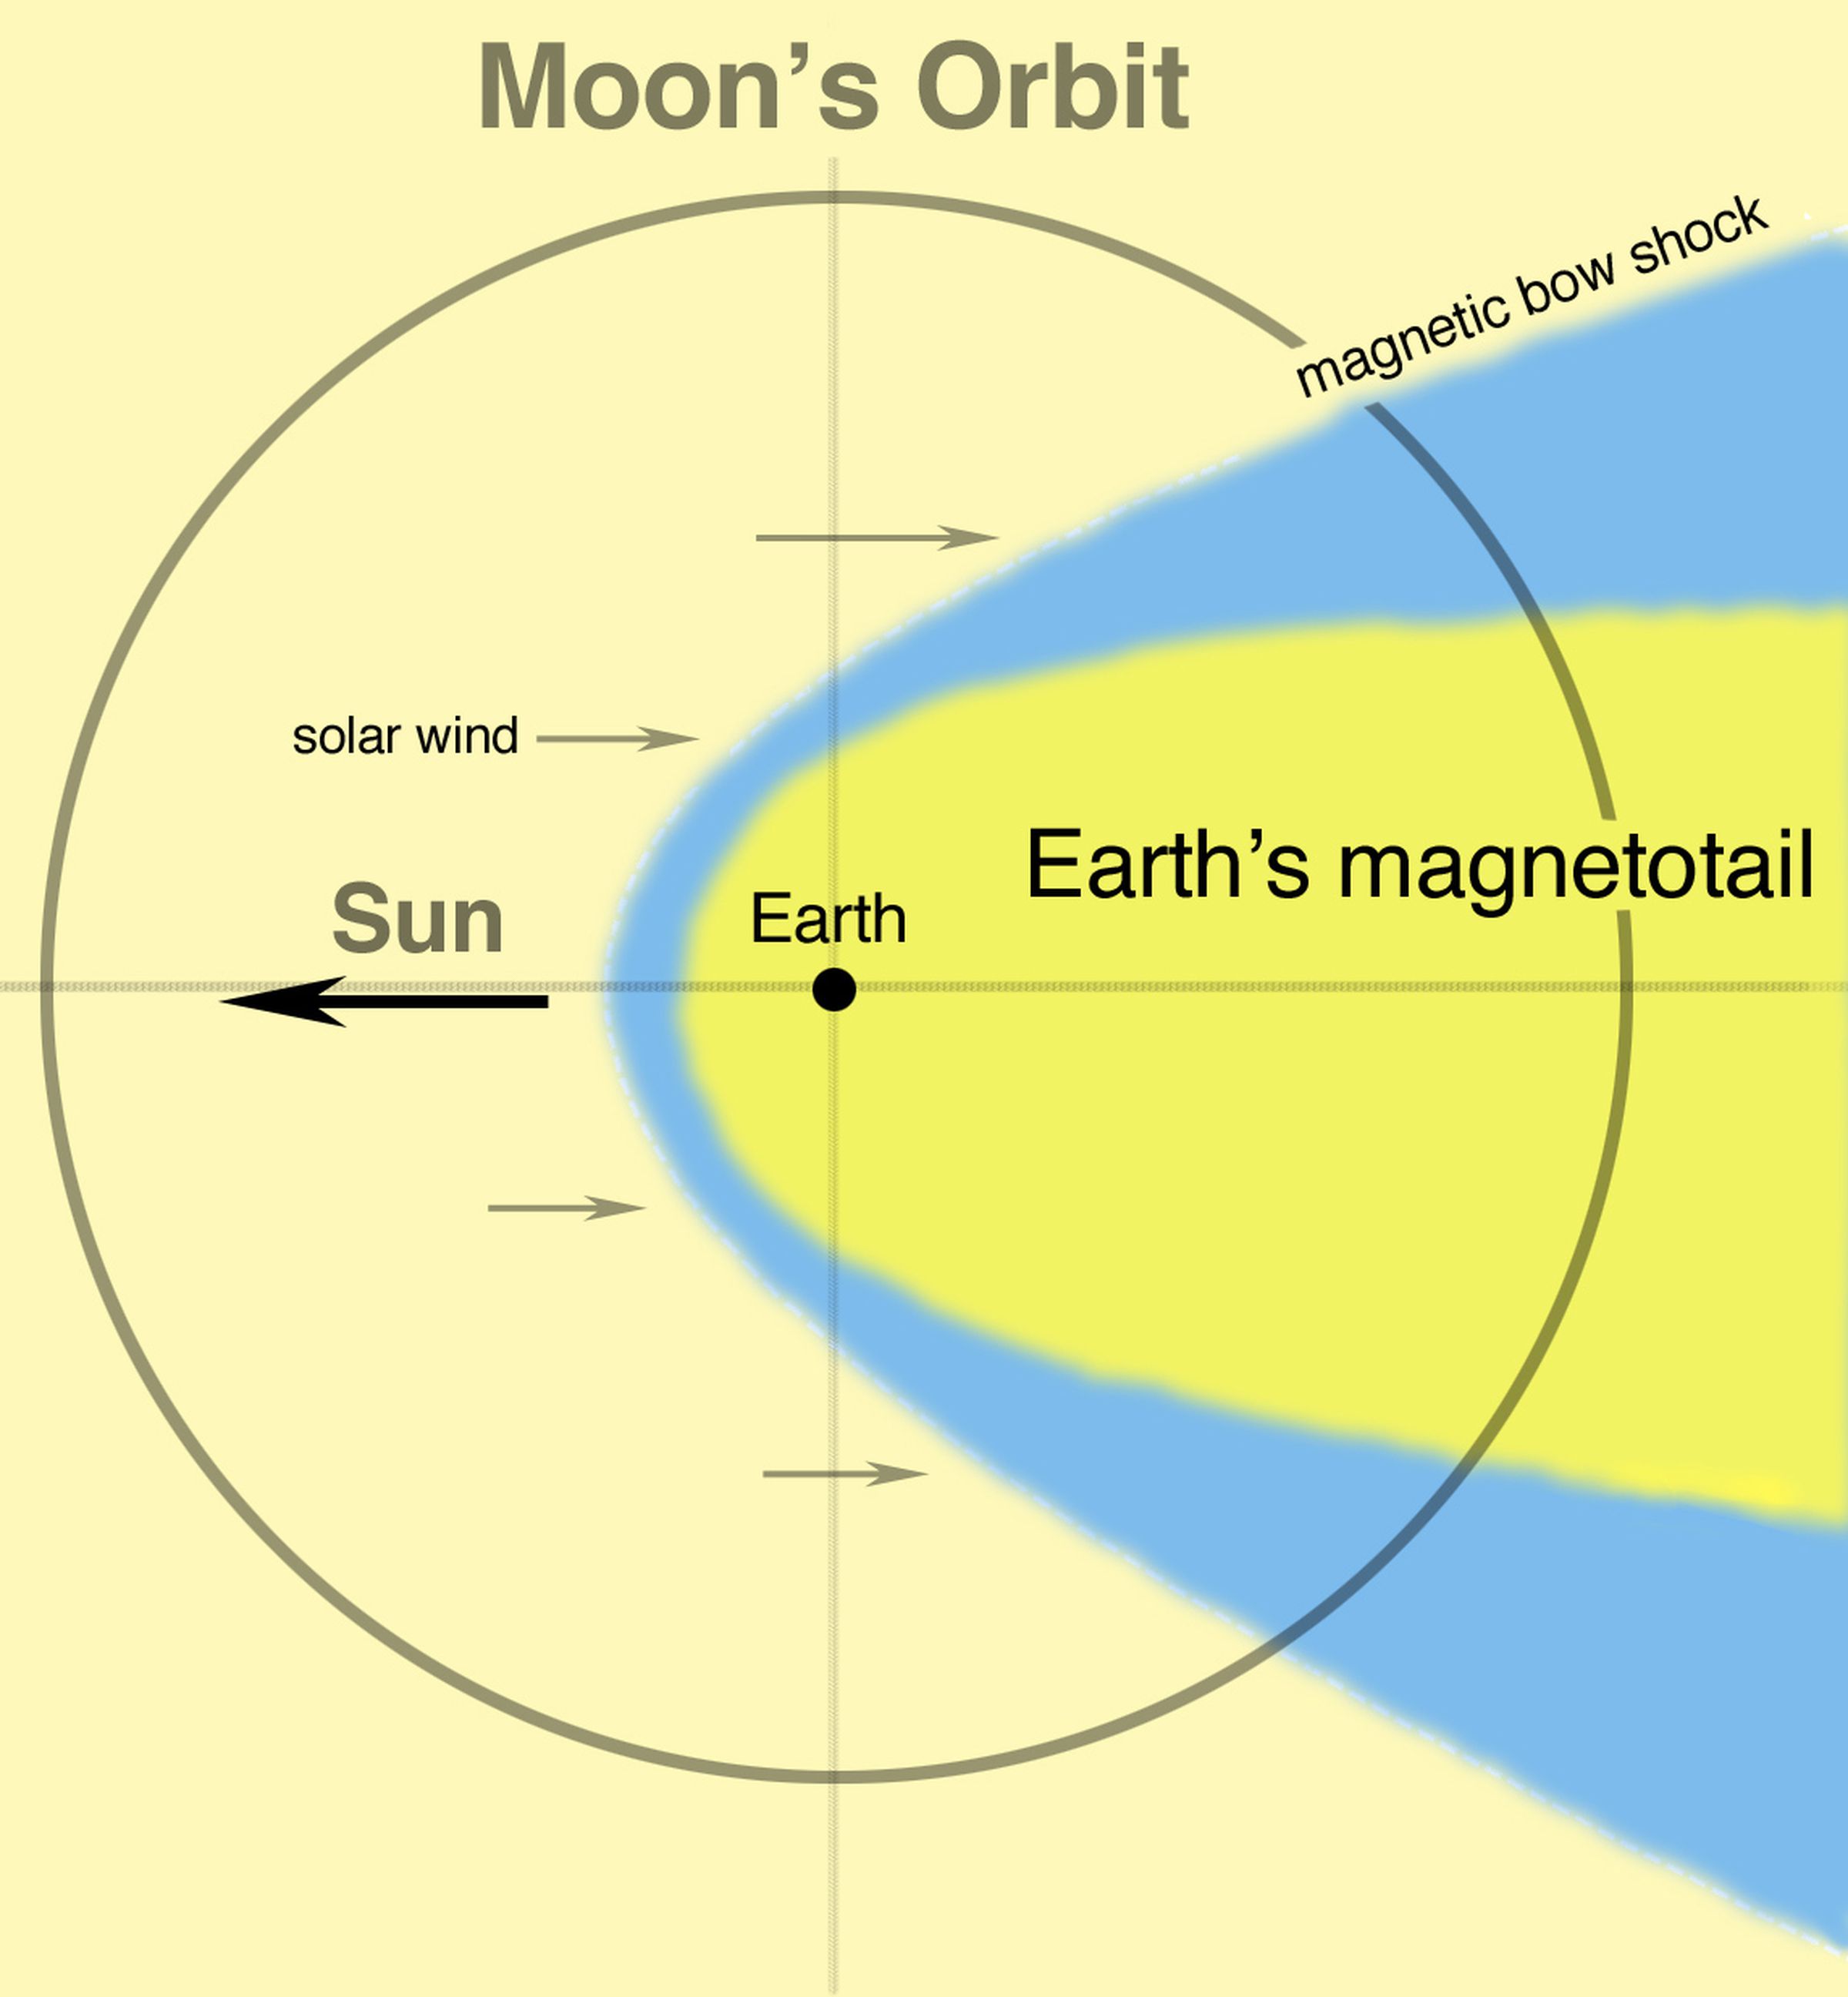 How the Moon passes through the magnetotail of Earth.